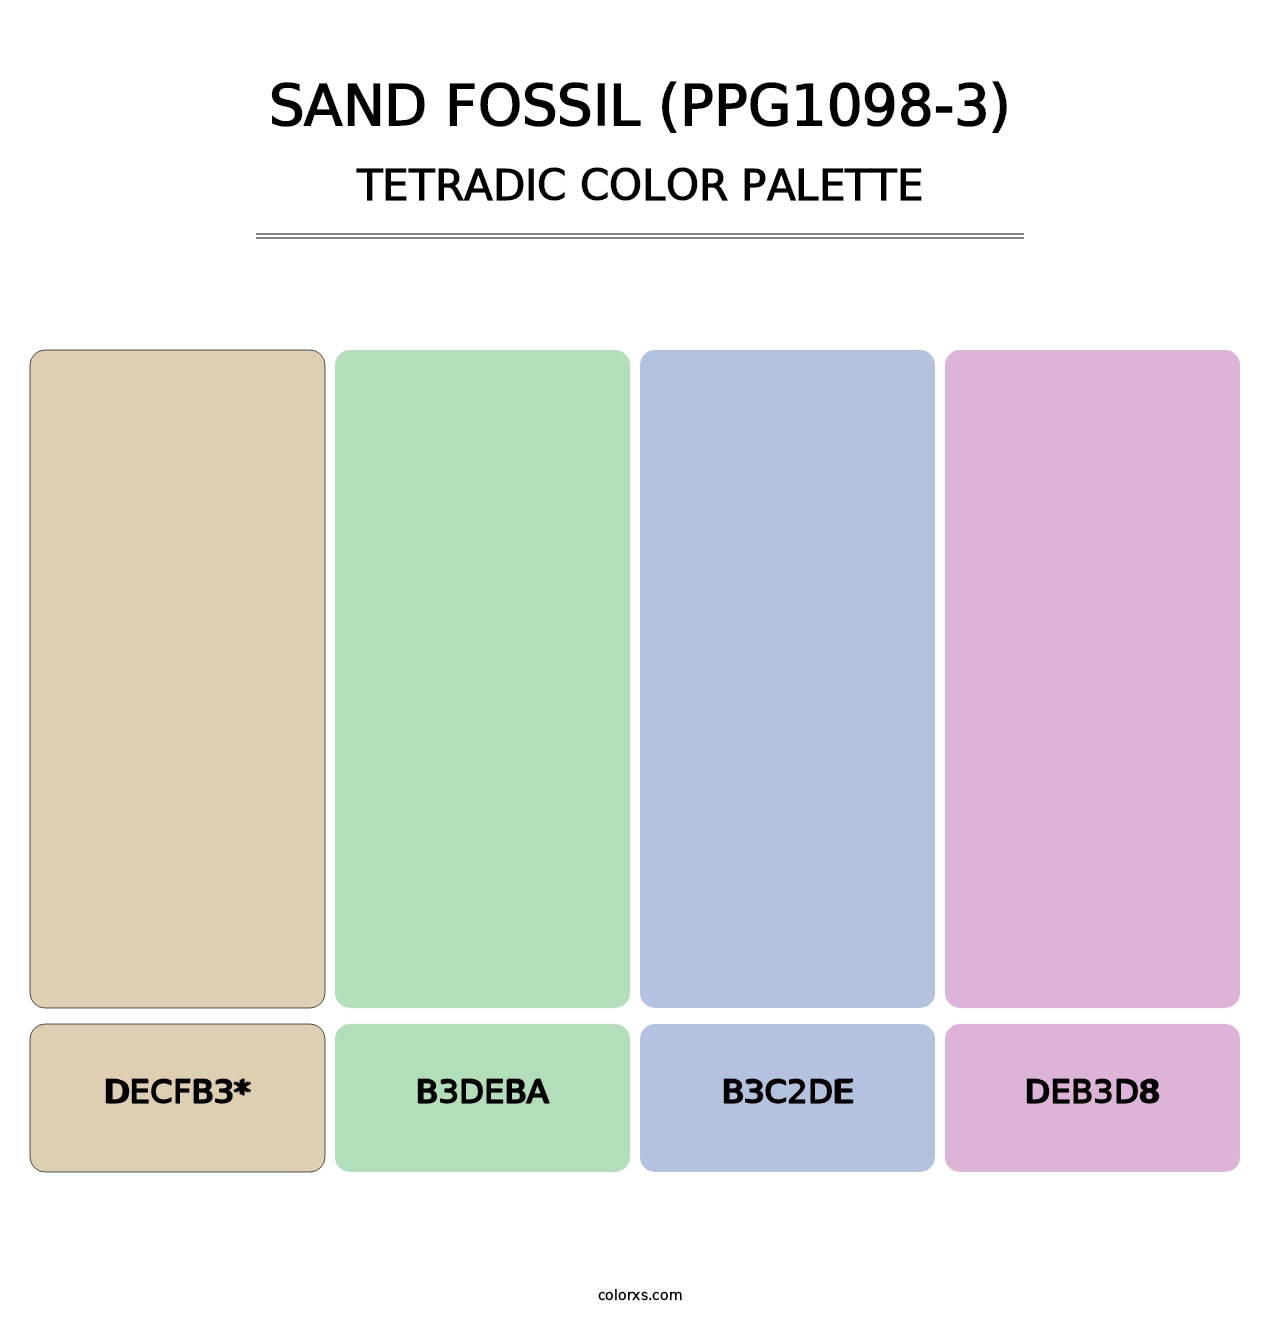 Sand Fossil (PPG1098-3) - Tetradic Color Palette